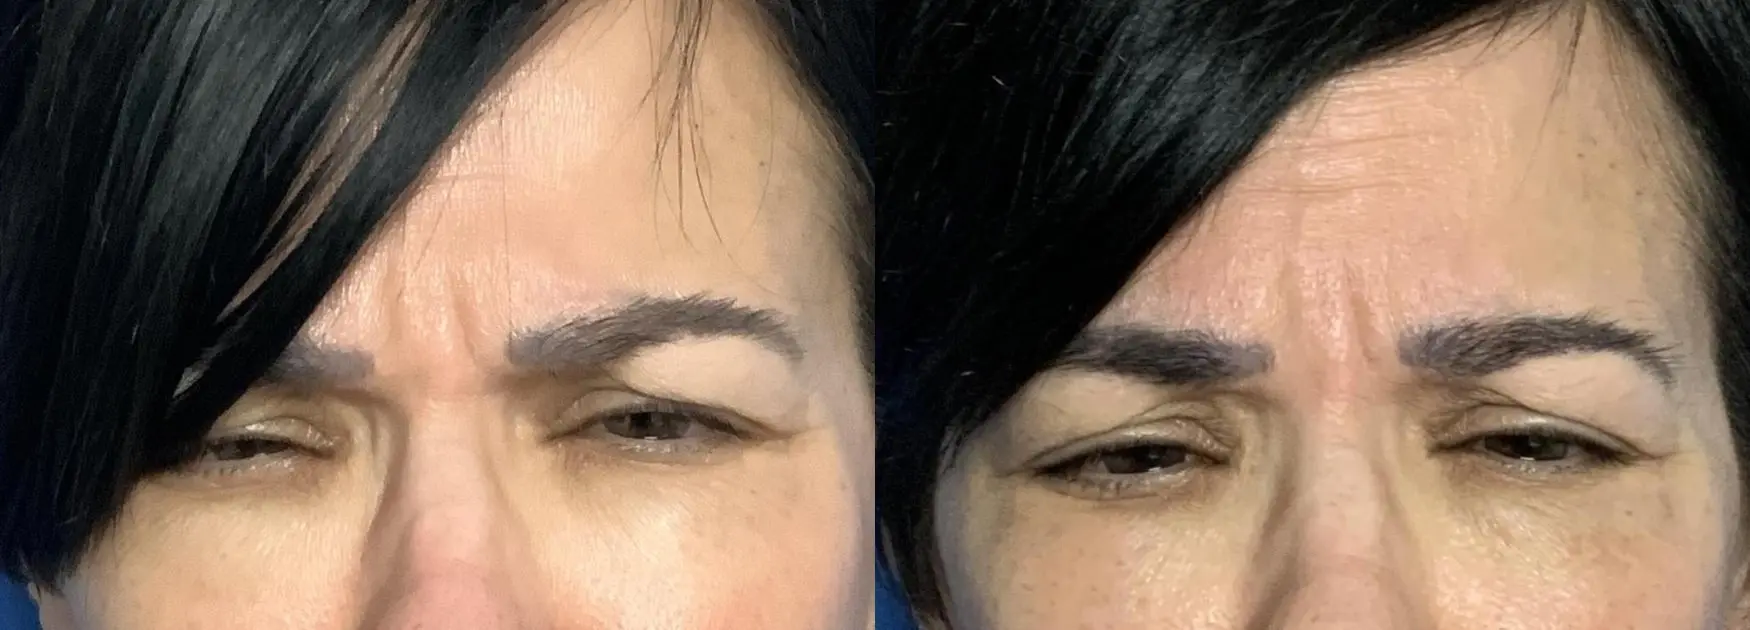 patient 13391 fillers before and after result - Before and After